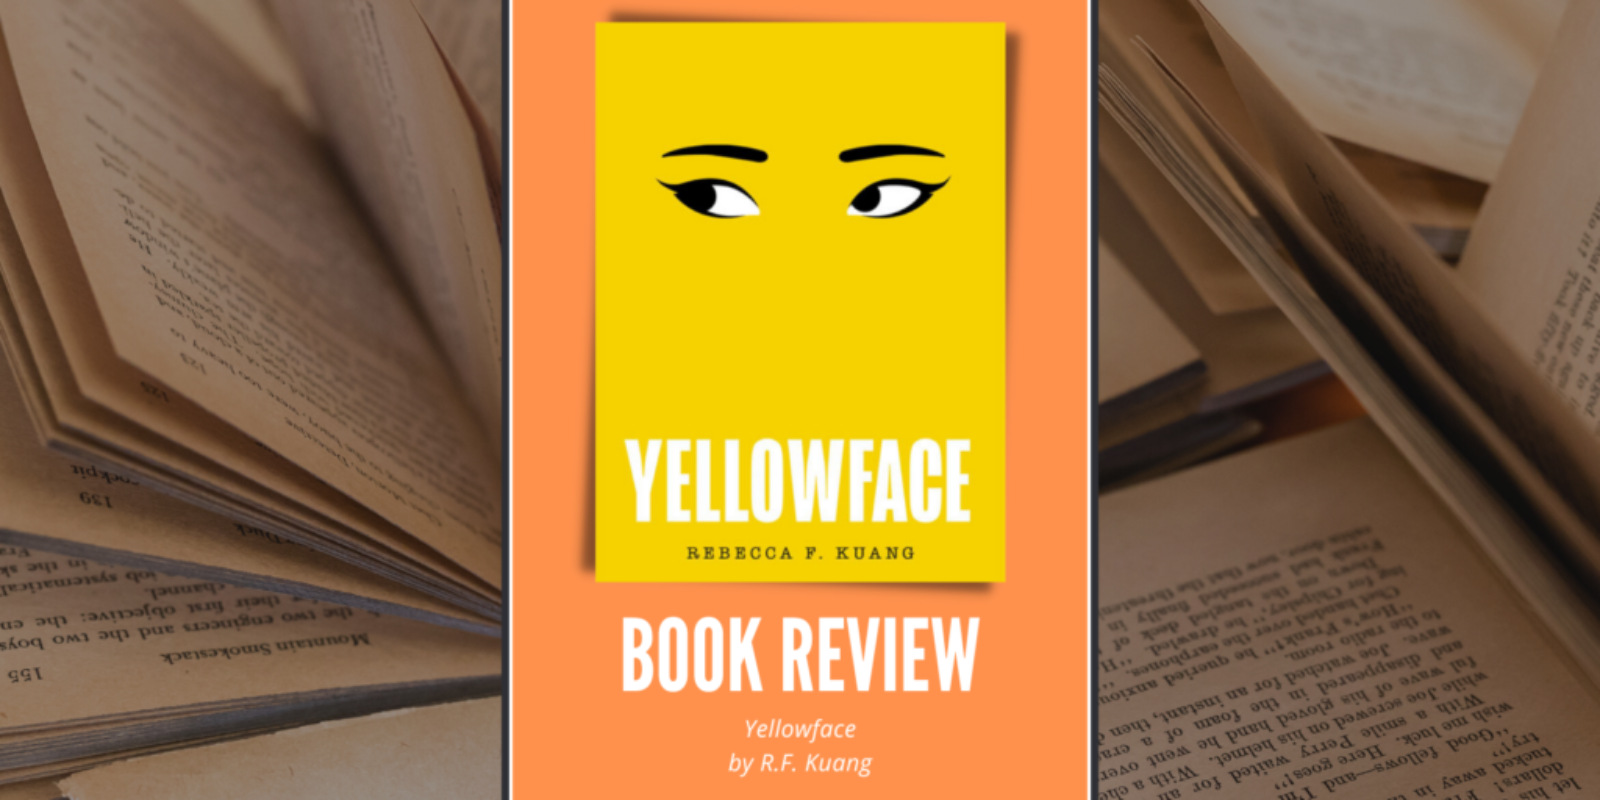 Yellowface by R.F. Kuang Book Review